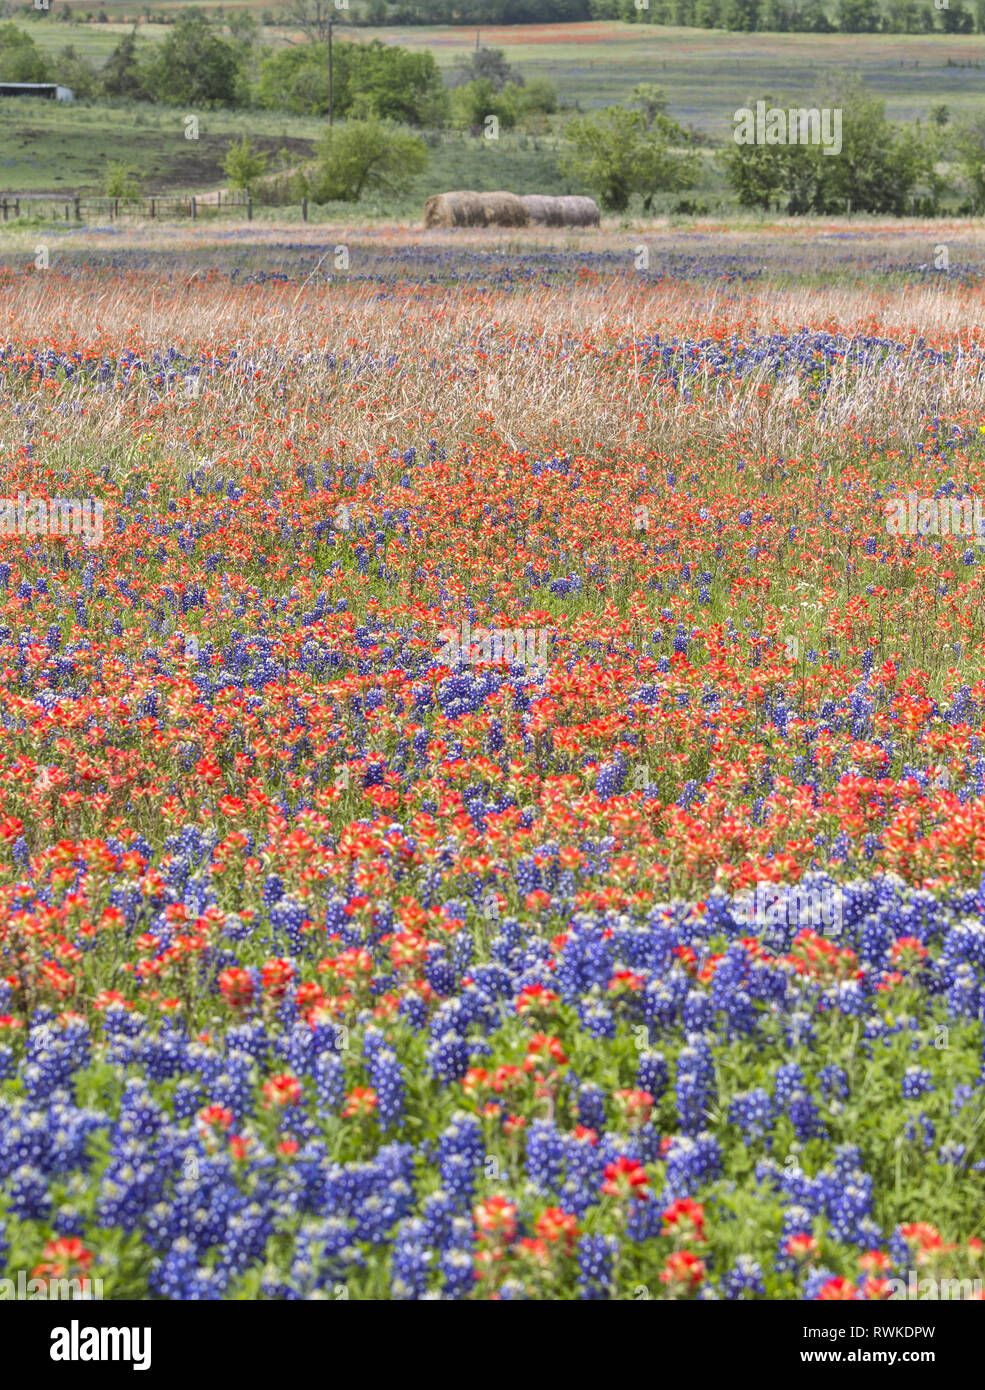 Rural field of bluebonnets and Indian Paintbrushes mix, Texas, USA Stock Photo